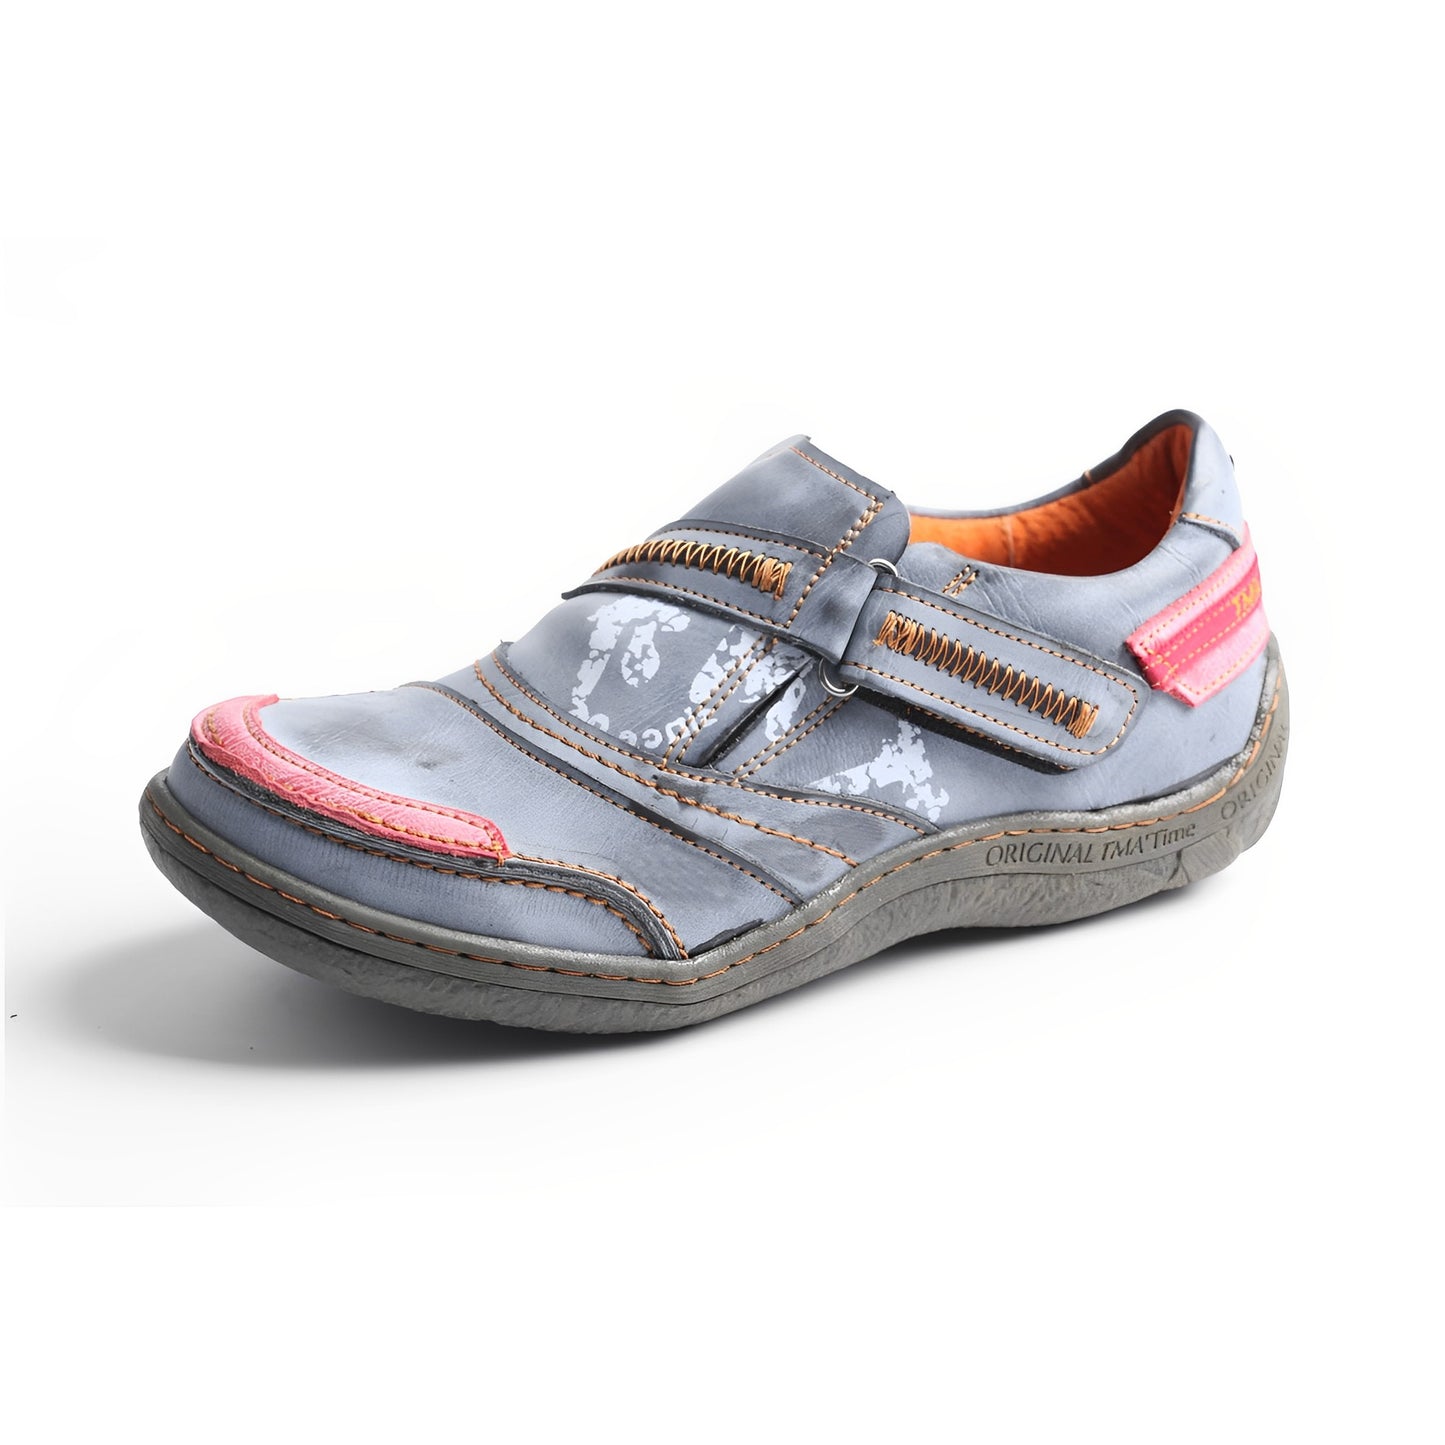 Women's Soft and Stylish Leather Slip-On Shoes for All-Day Comfort and Support